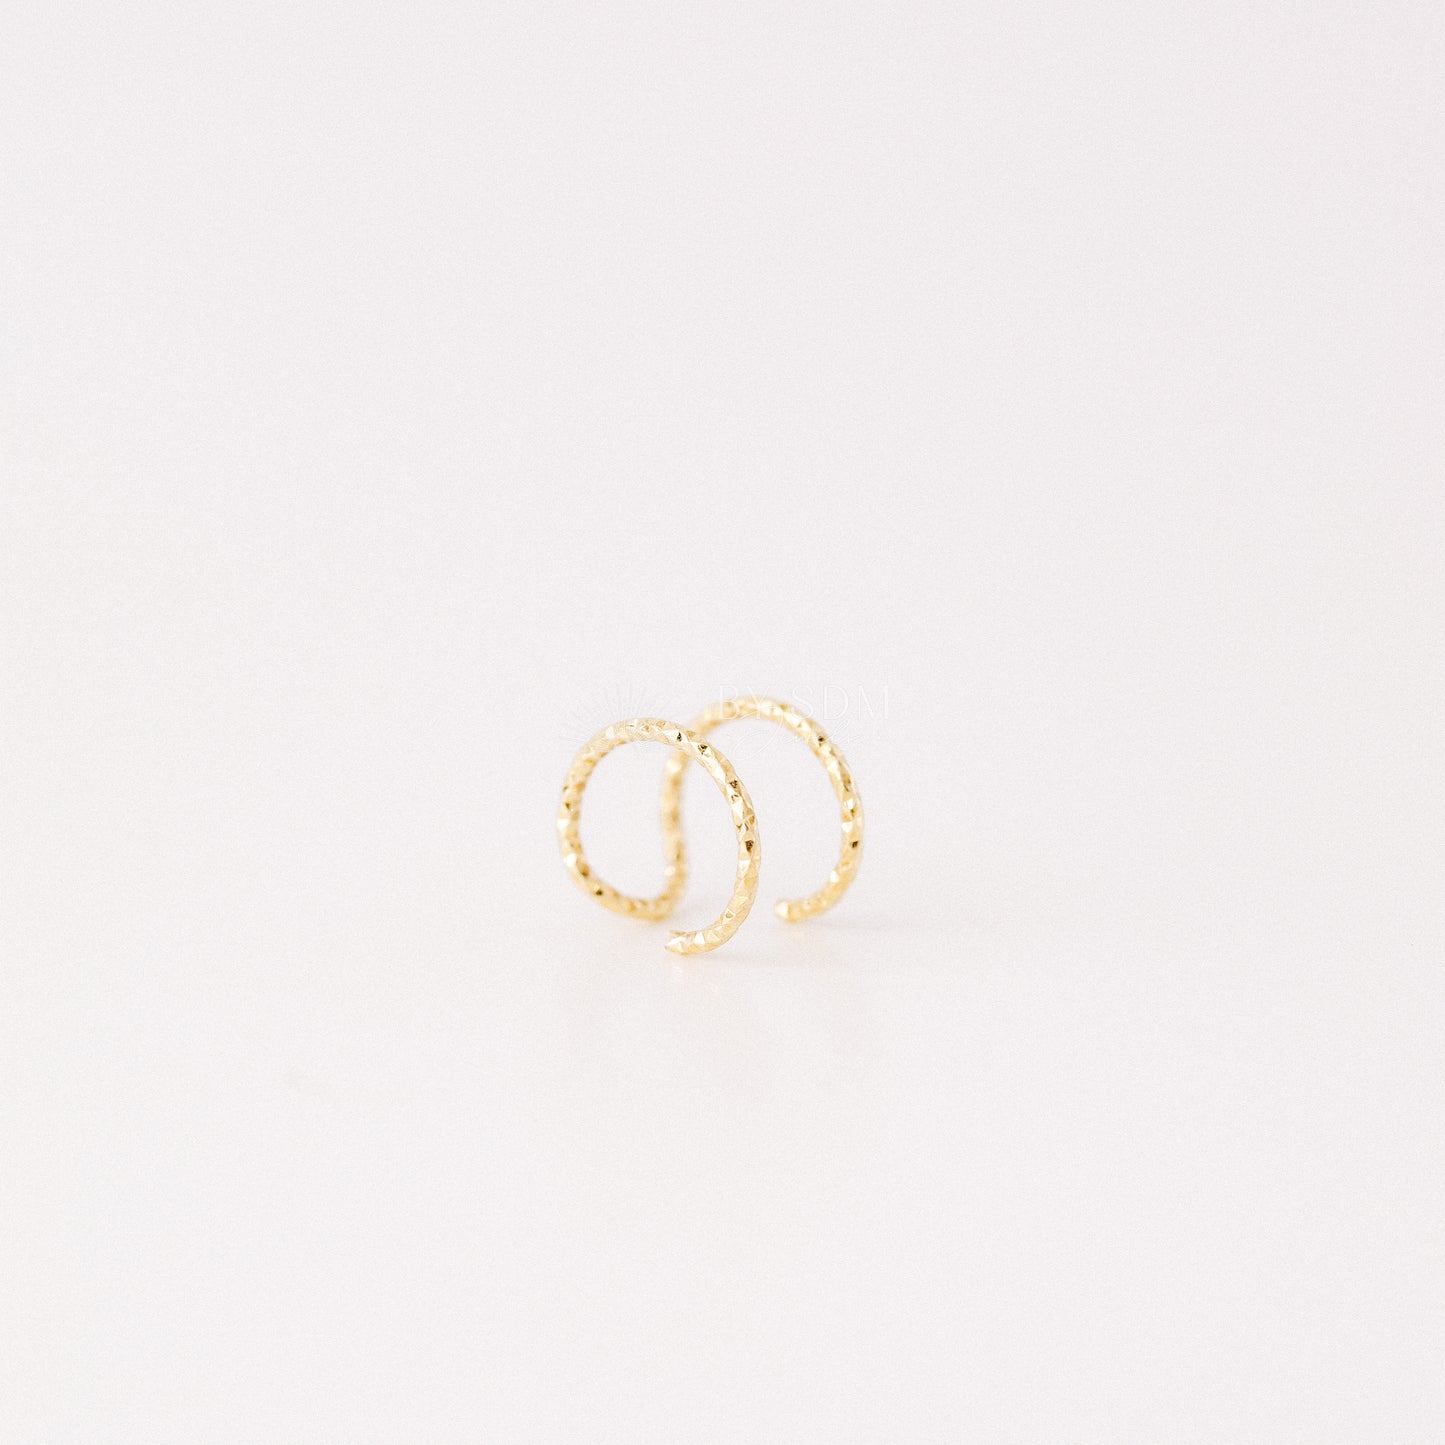 Gold Double Line or Criss Cross Ear Cuff